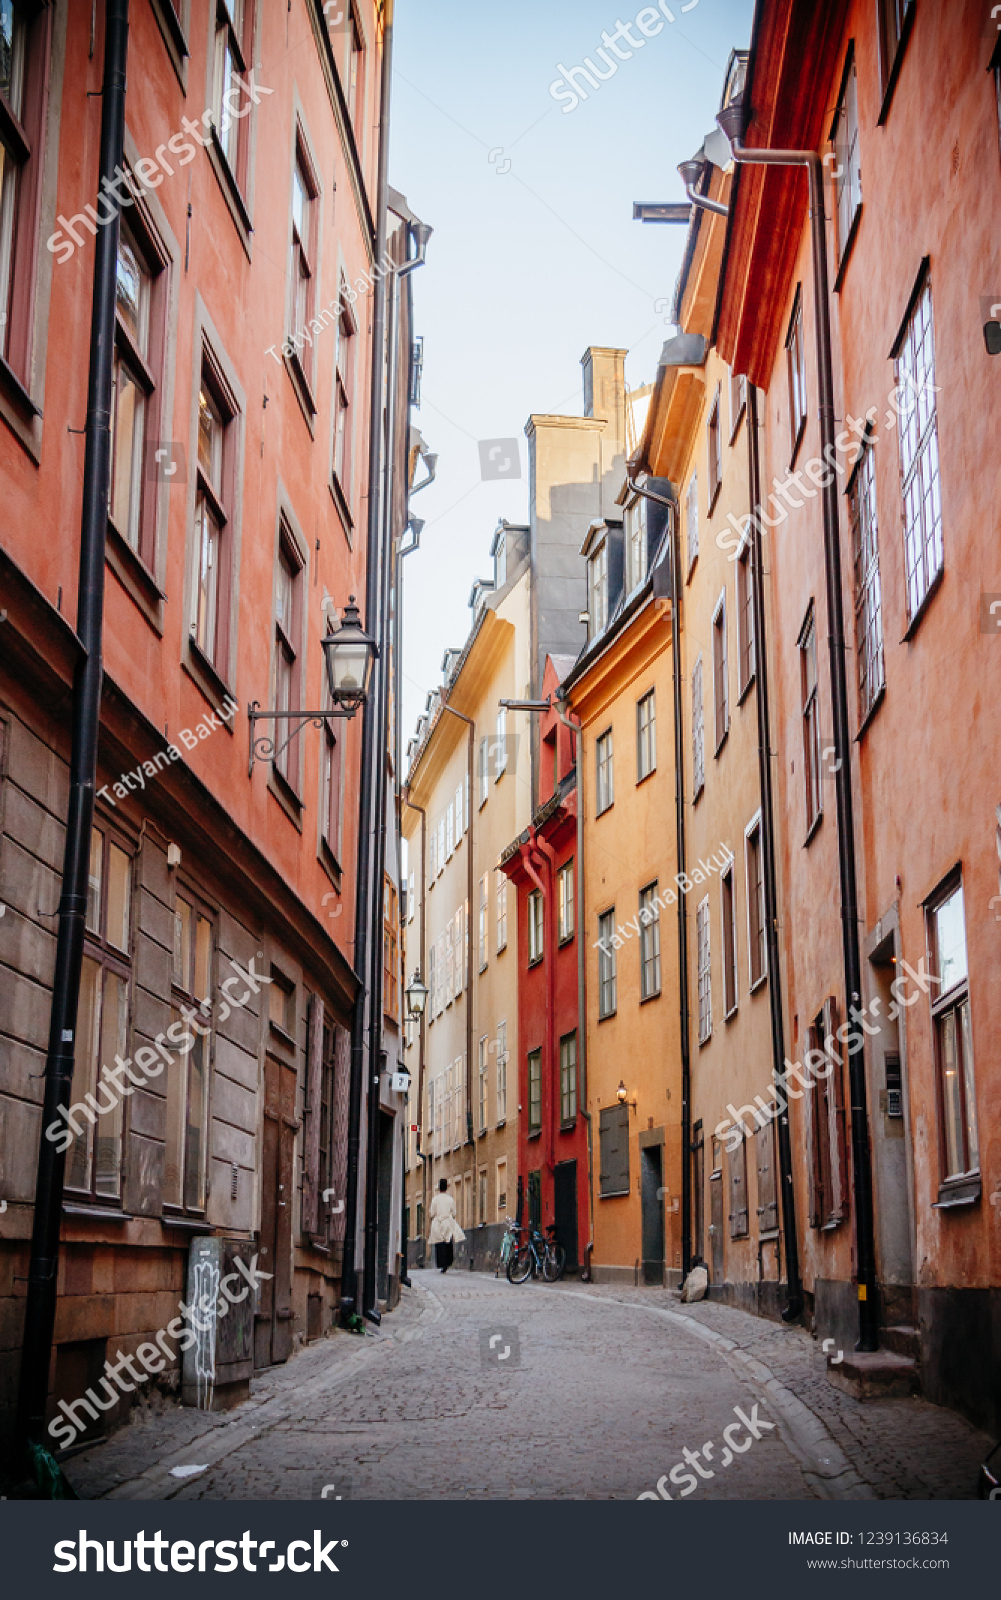 Colorful Street Old Town Stockholmswedengamla Stan Stock Photo